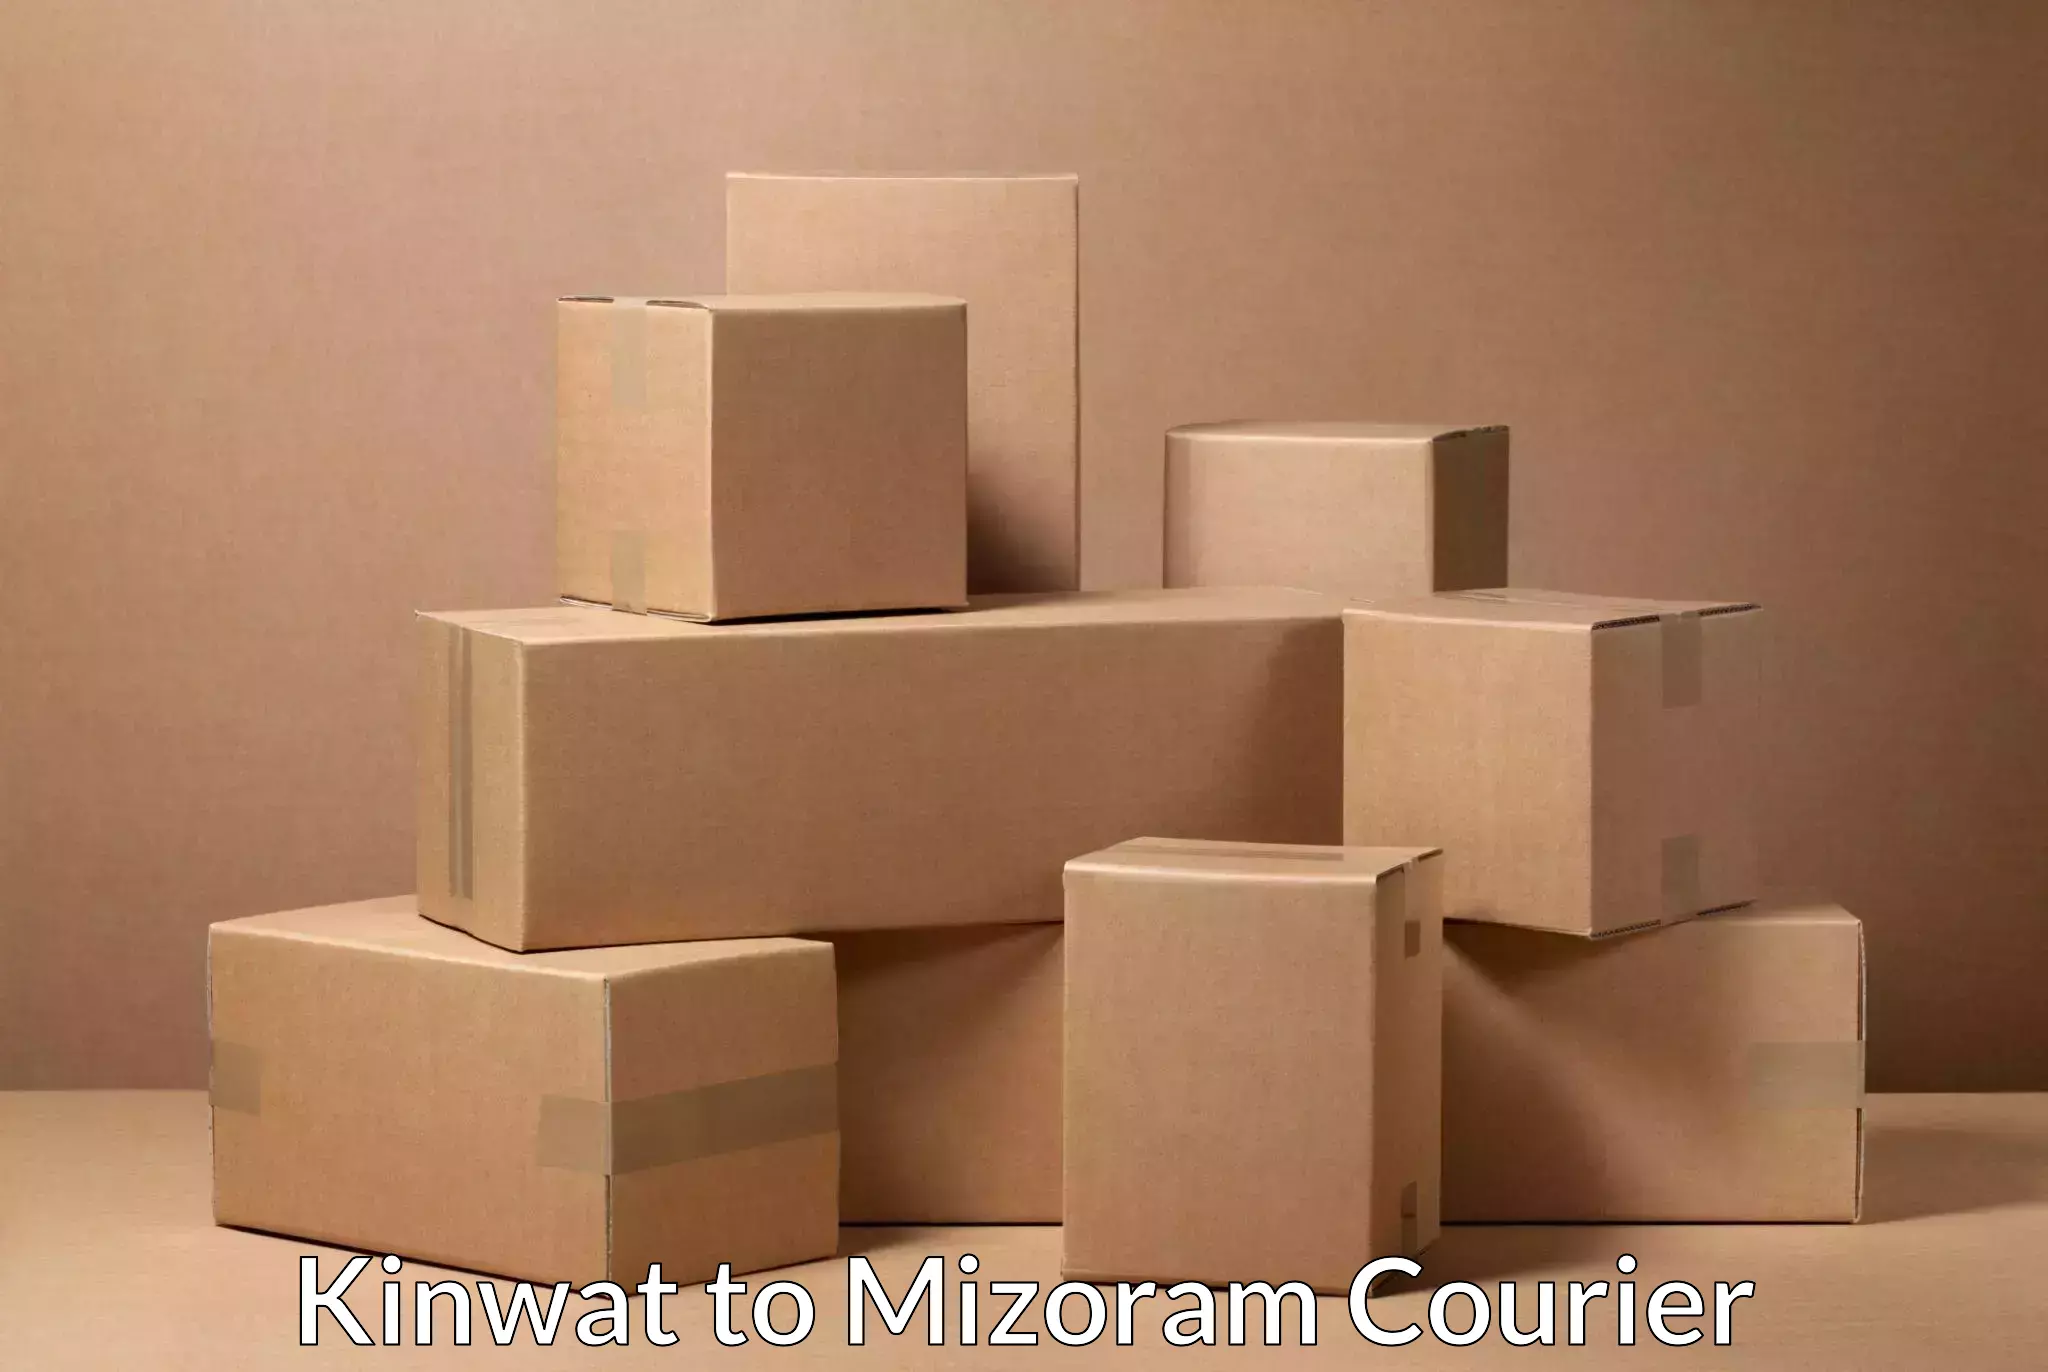 Express delivery network Kinwat to Mizoram